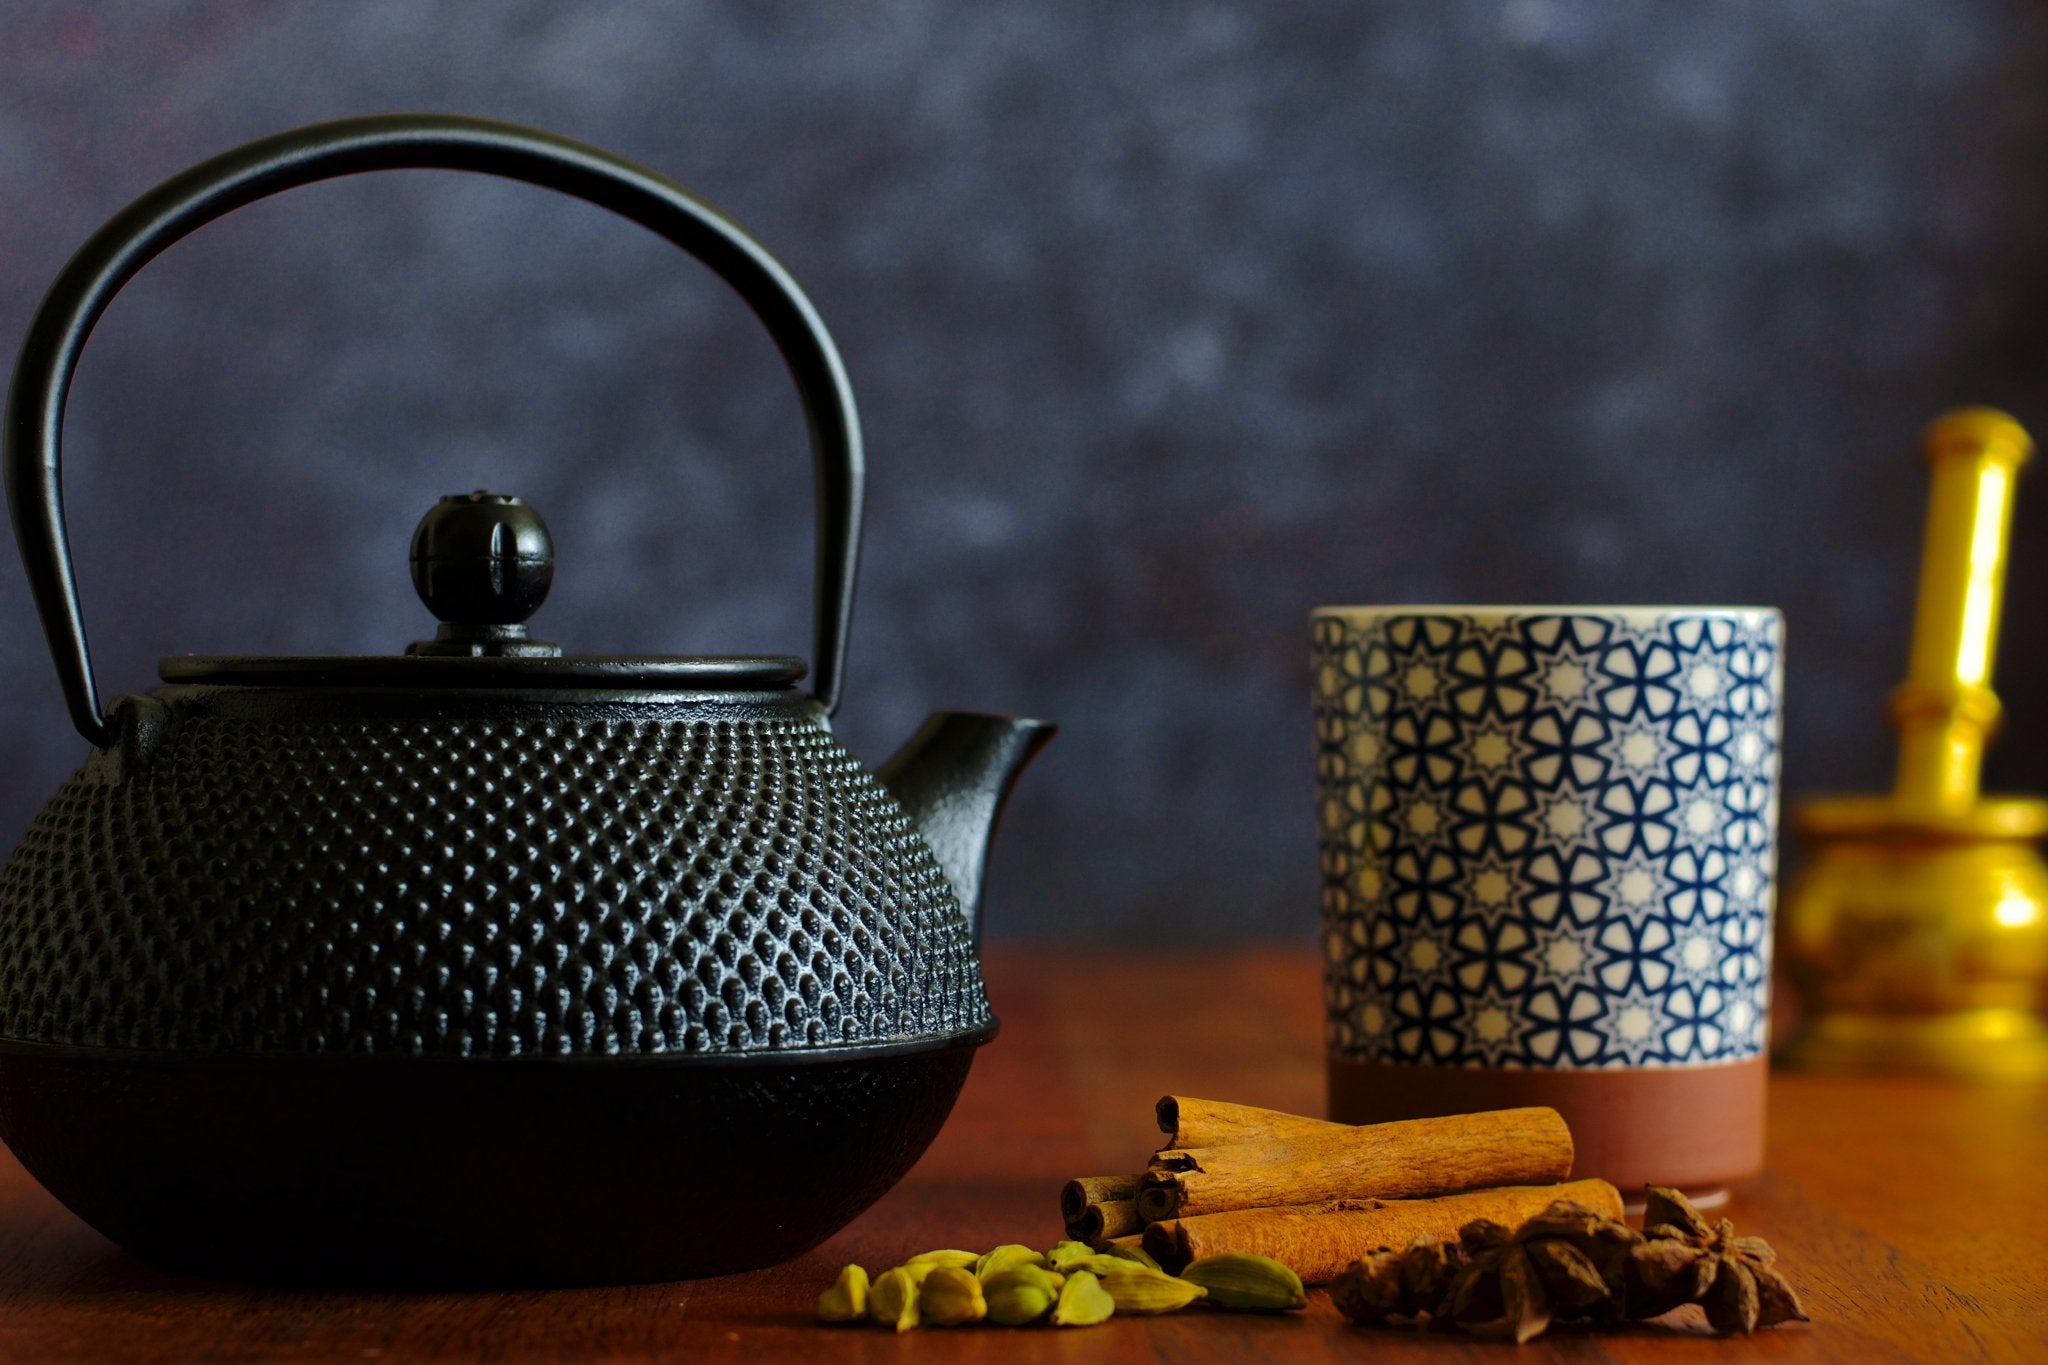 How To Brew Loose Leaf Tea: Steeping Instructions and Required Teaware